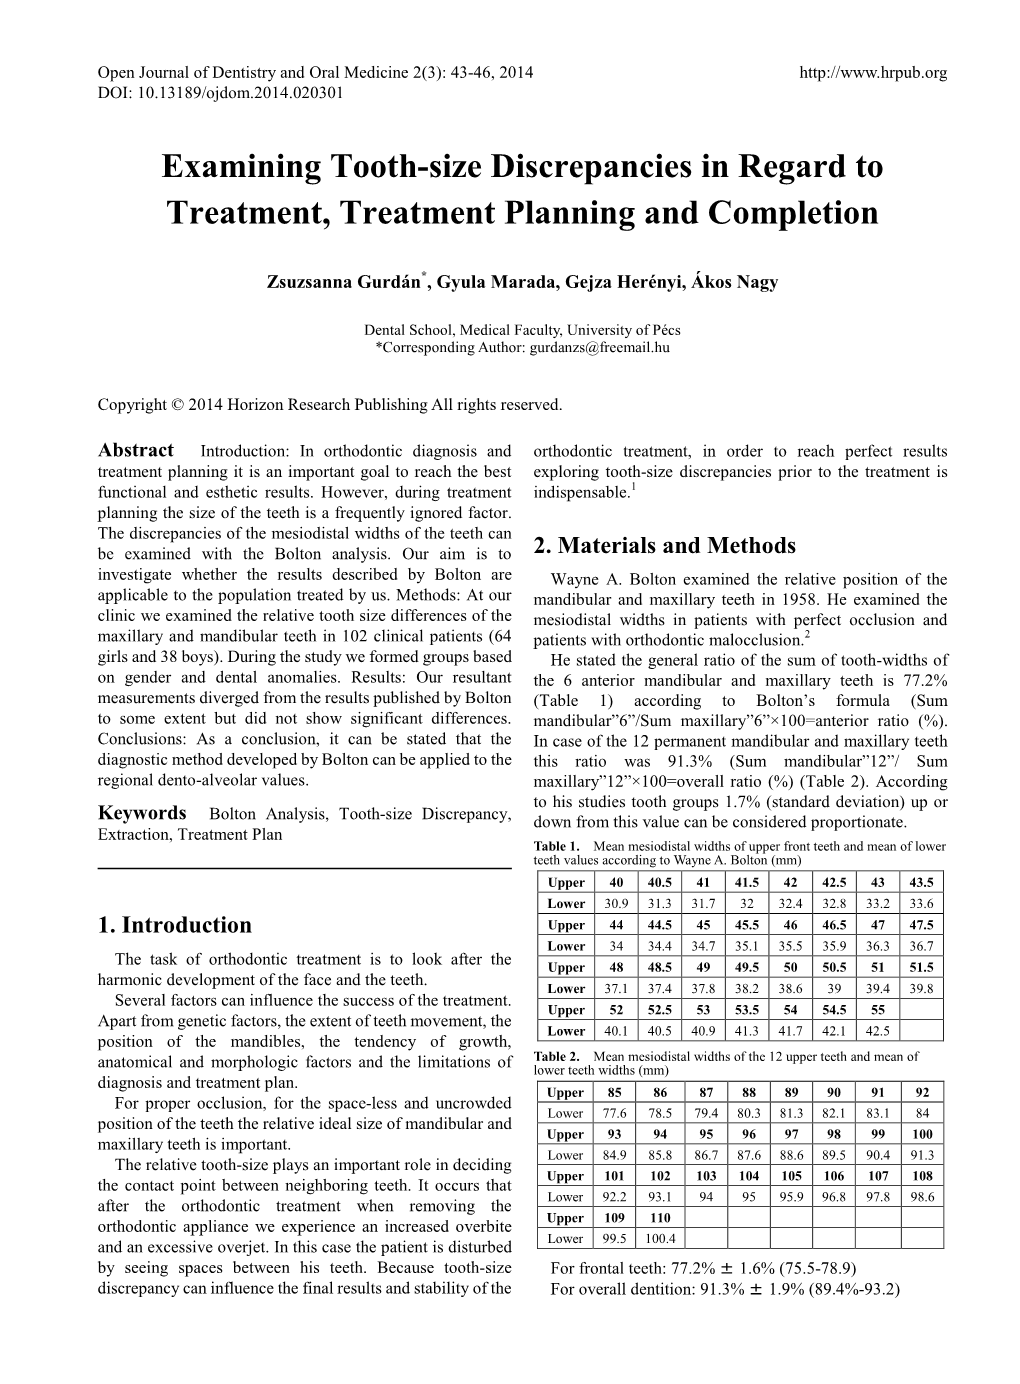 Examining Tooth-Size Discrepancies in Regard to Treatment, Treatment Planning and Completion